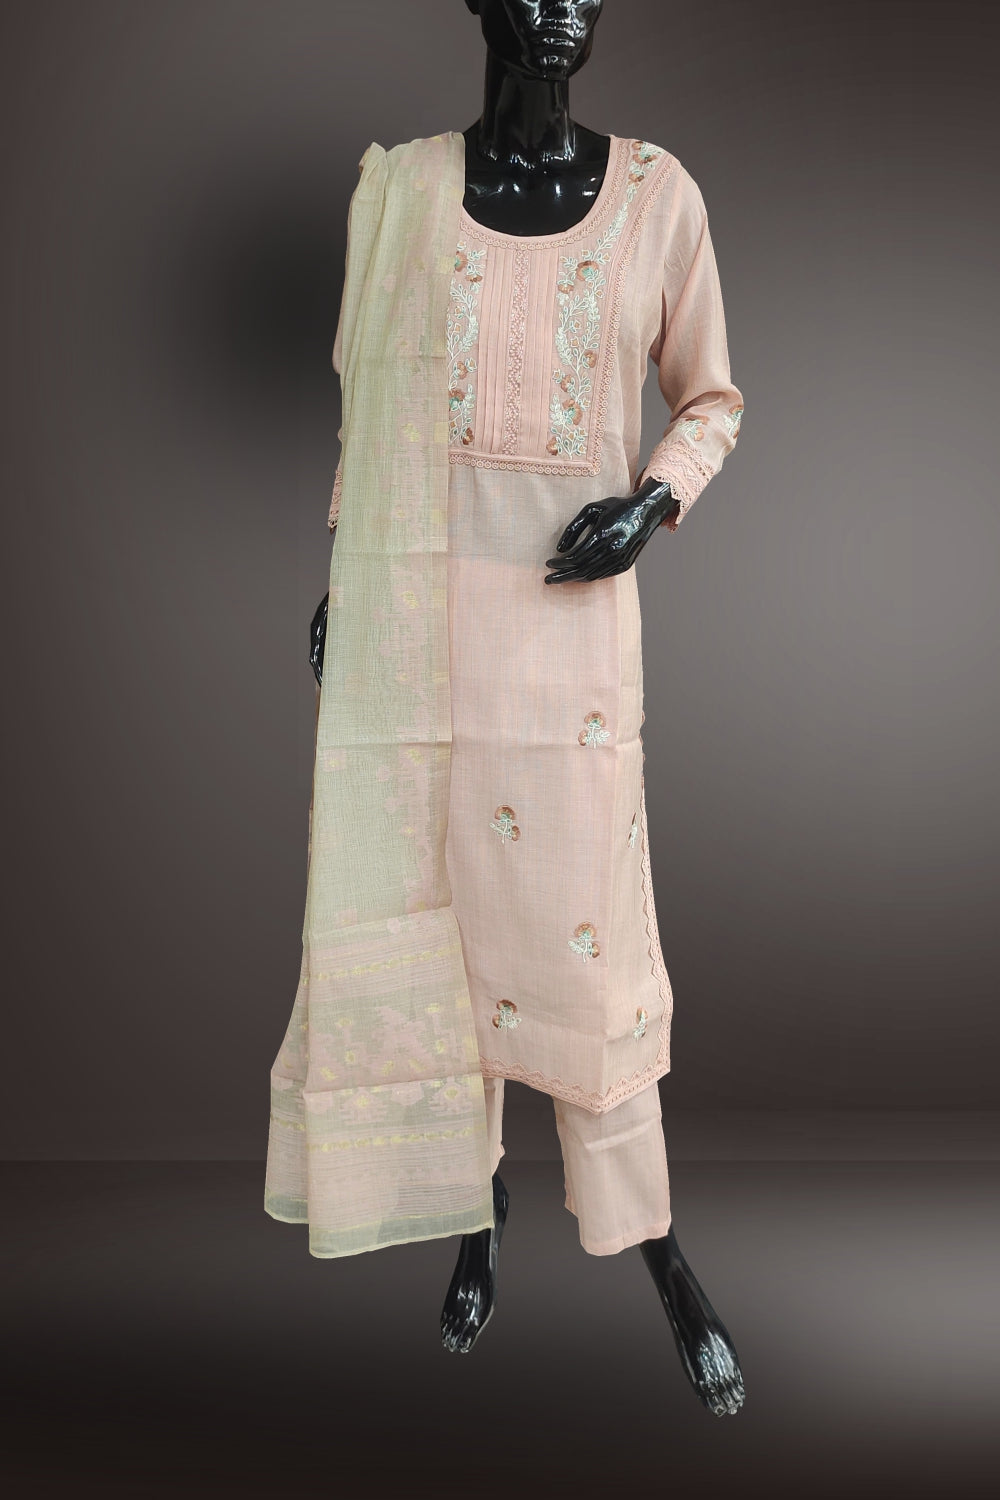 Sugared Peach Cotton Embroidered and Lace Work Salwar Kameez